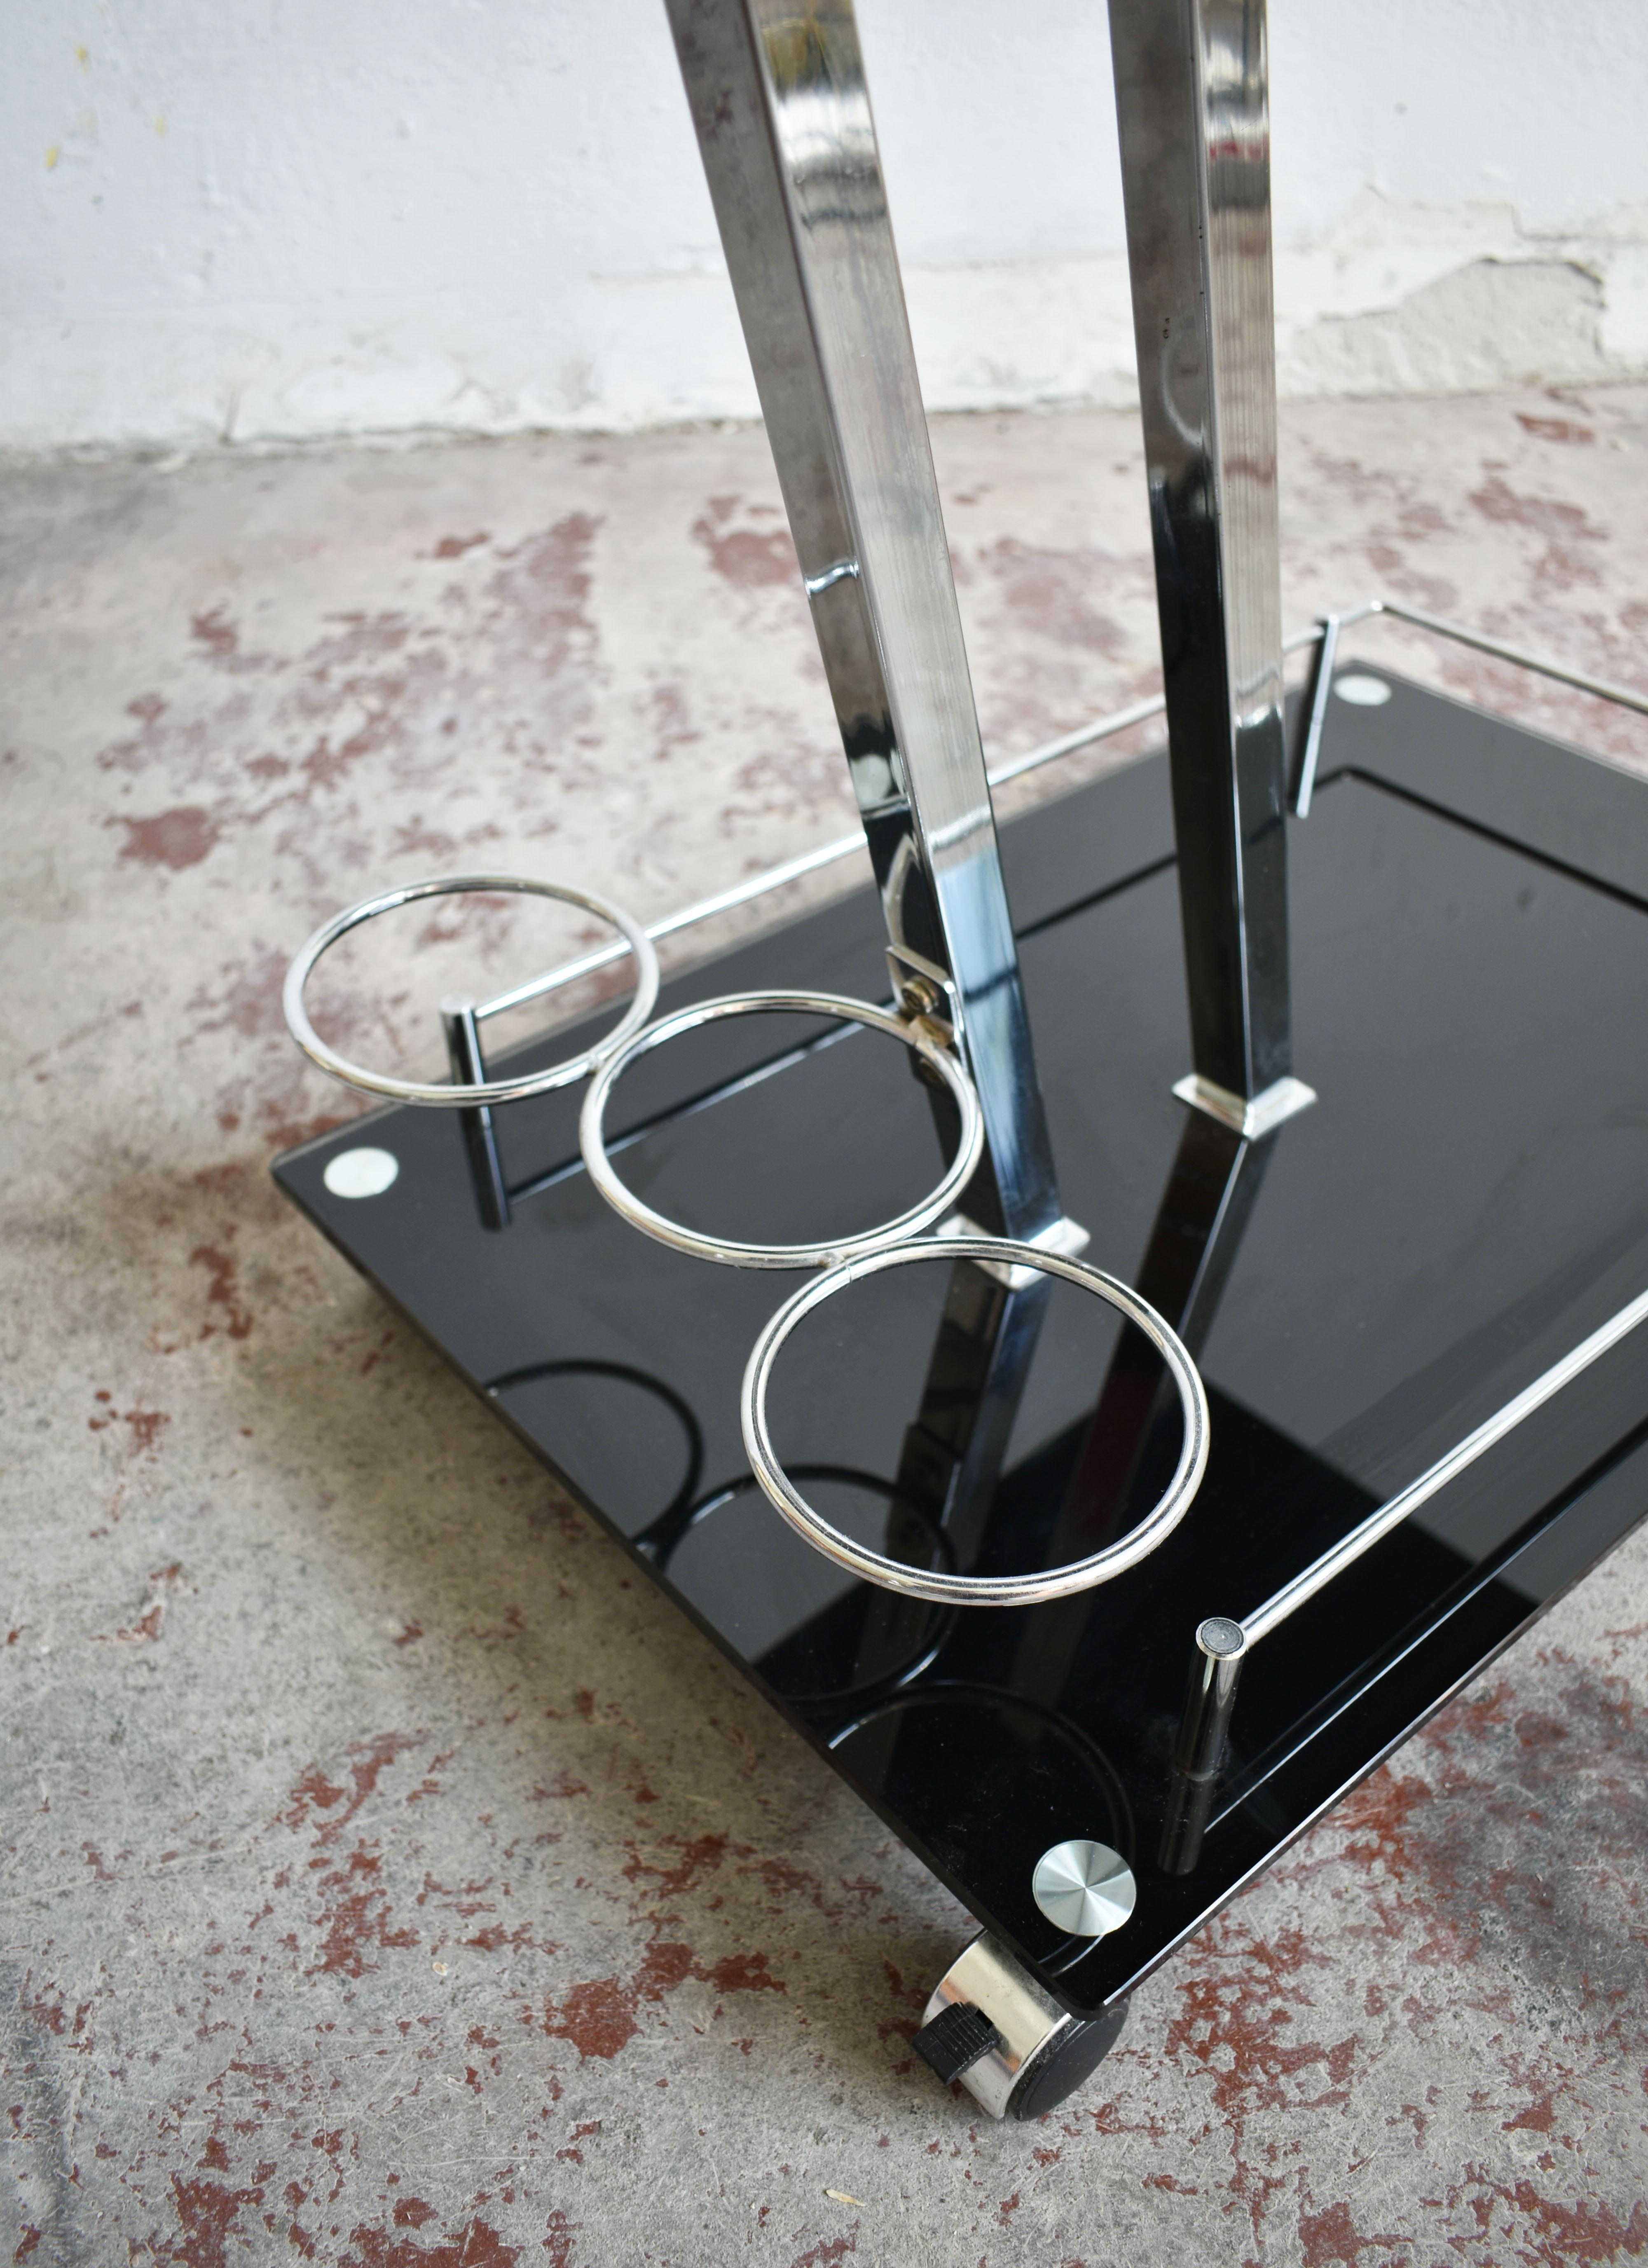 Italian Modernist Chrome and Glass Bar Cart Trolley Attributed to Willy Rizzo, 1970s